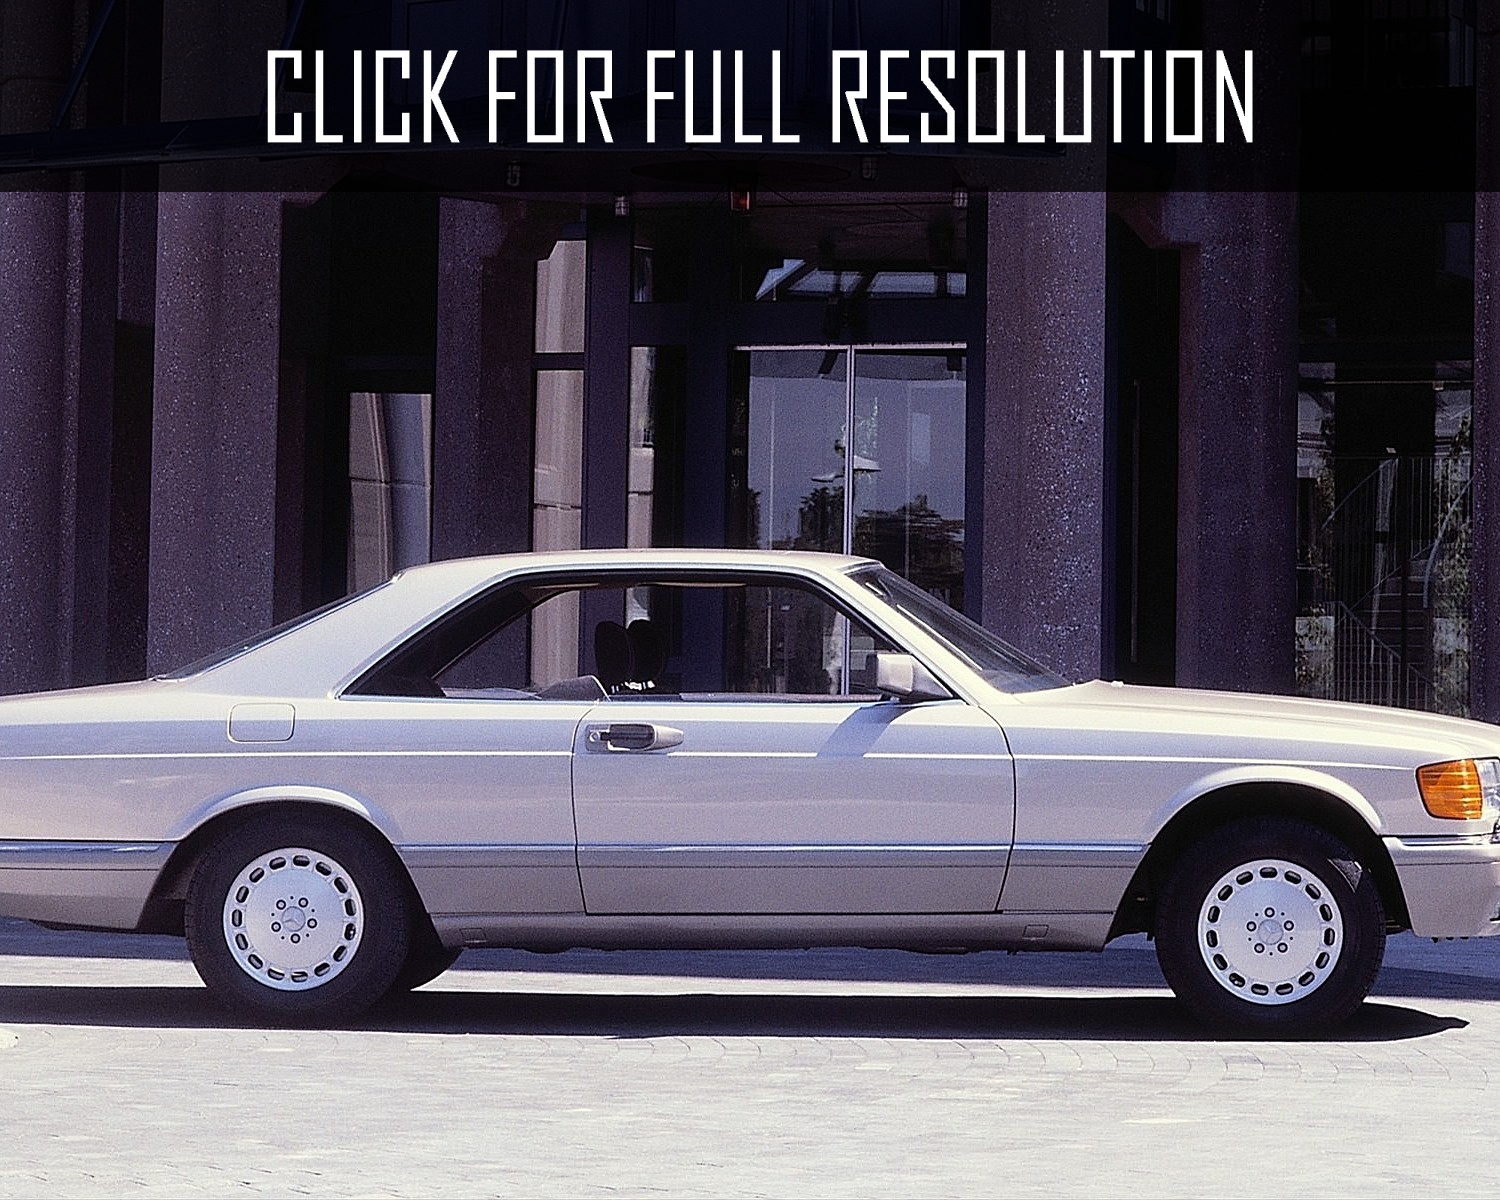 1991 Mercedes Benz S Class Coupe